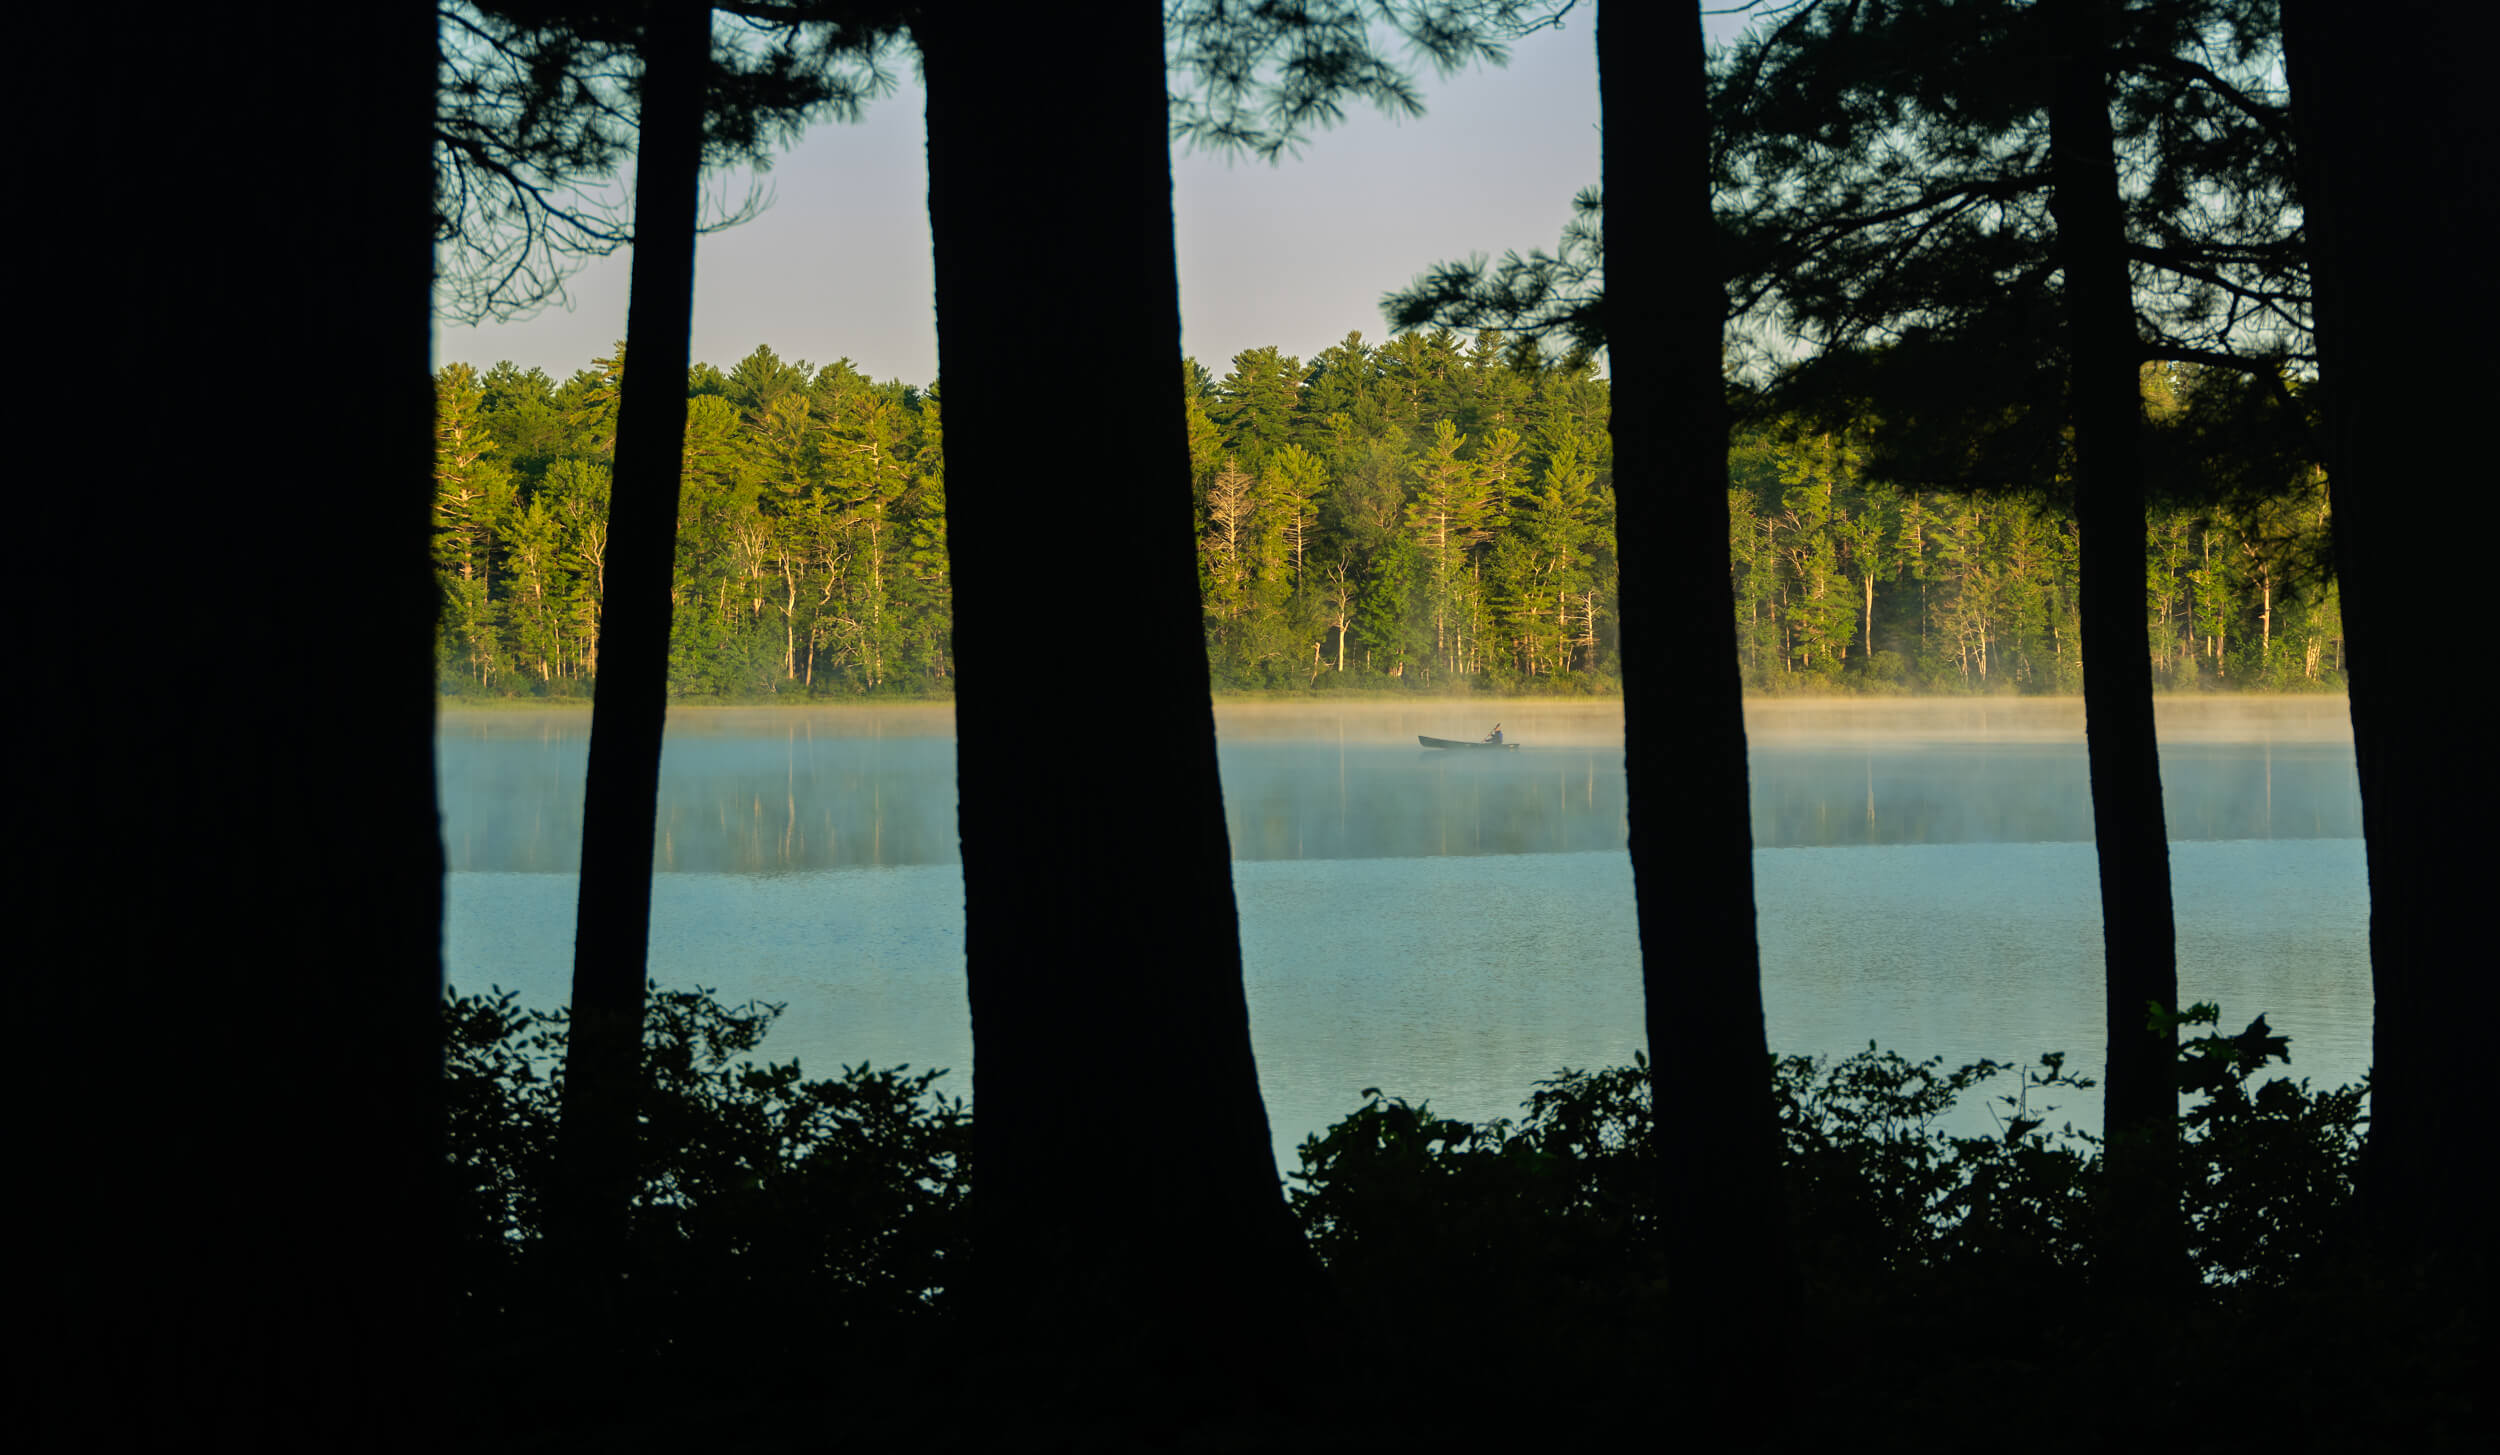 A guest takes out a canoe on Tripp Lake at sunrise 